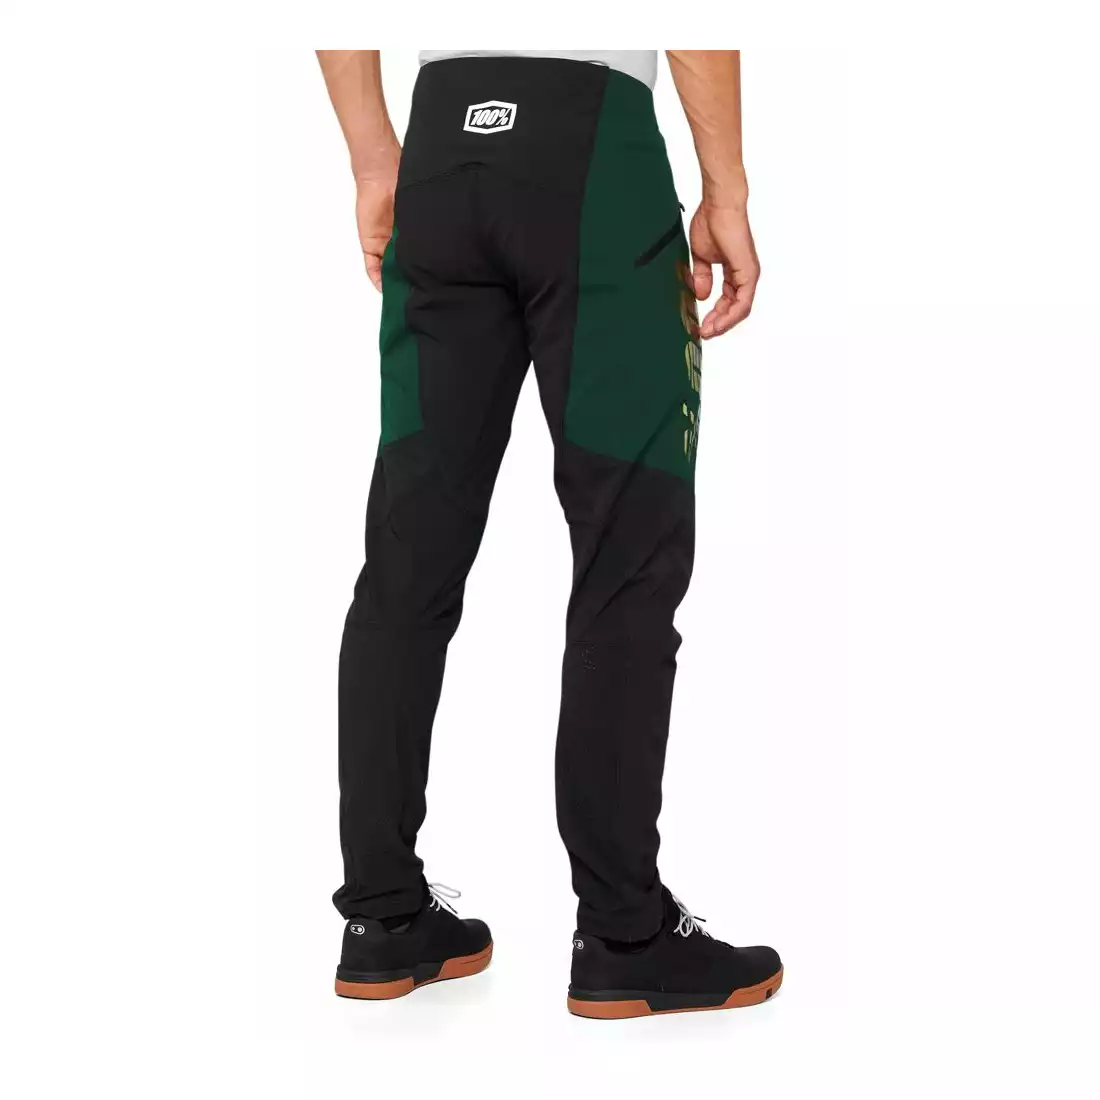 100% R-CORE X Men's cycling pants Limited Edition, green-black